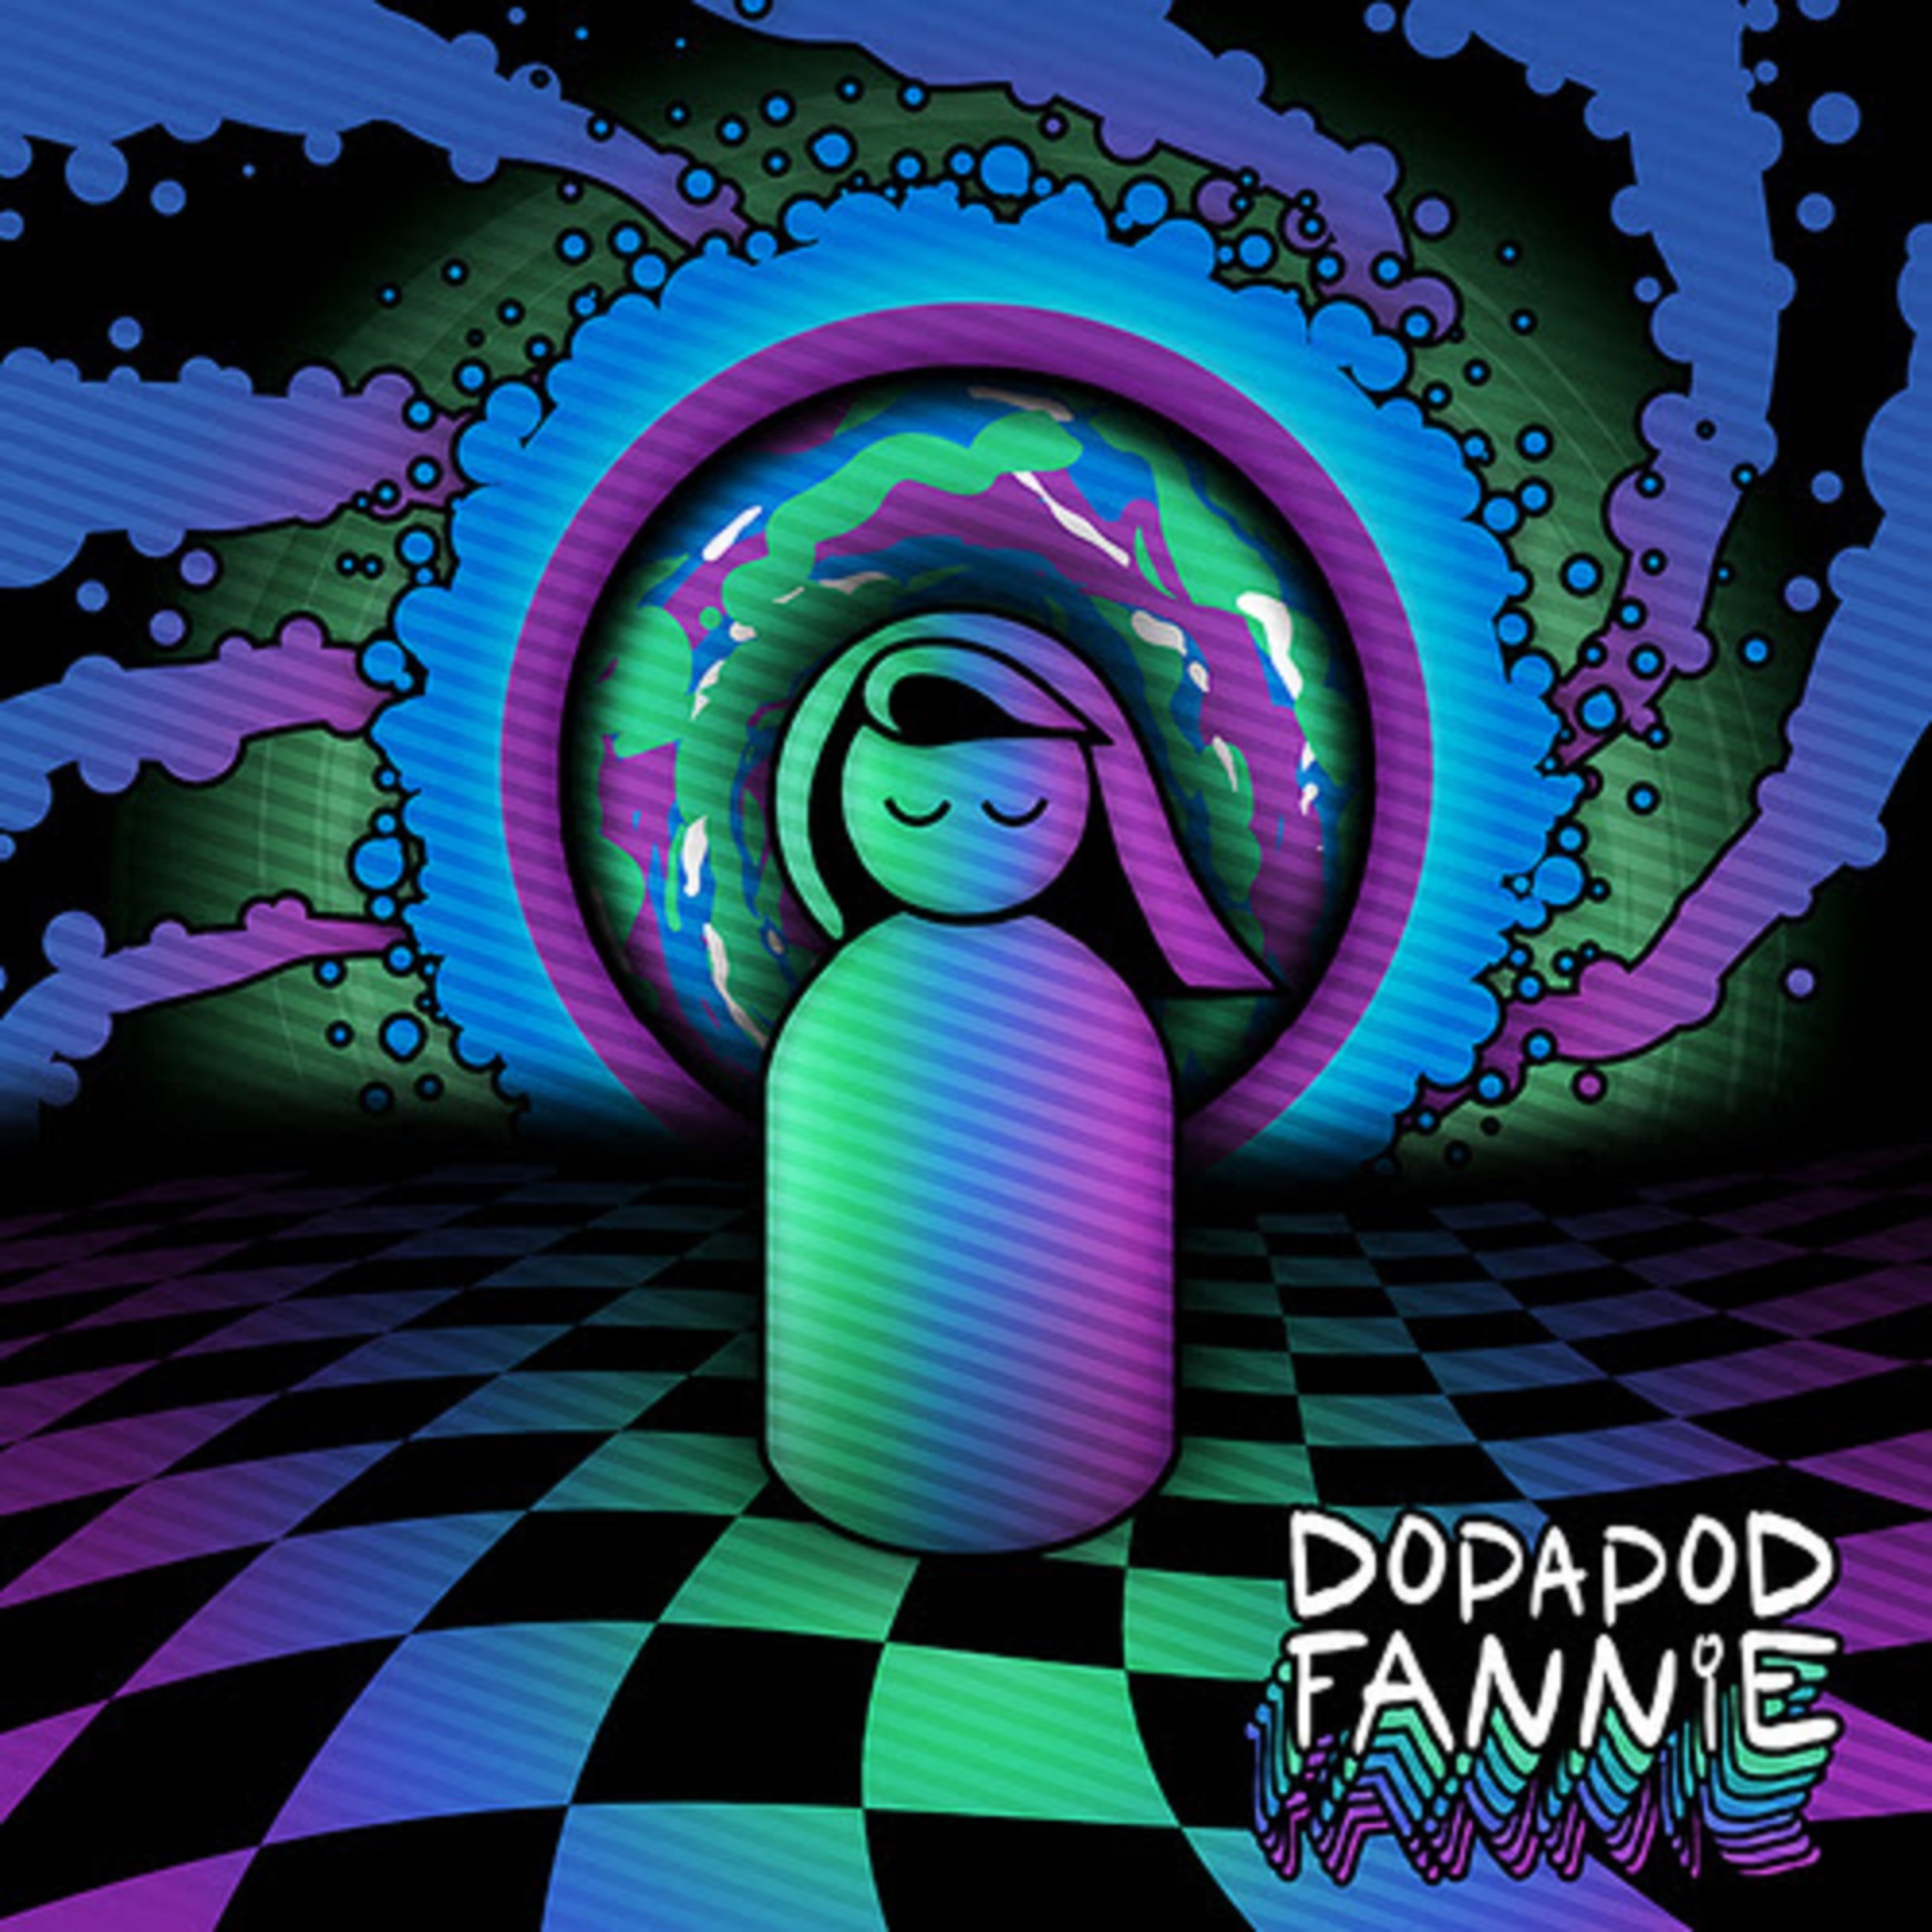 DOPAPOD RELEASE THEIR NEW SINGLE “FANNIE” FROM THEIR SEVENTH ALBUM DOPAPOD DUE OUT ON MAY 27TH